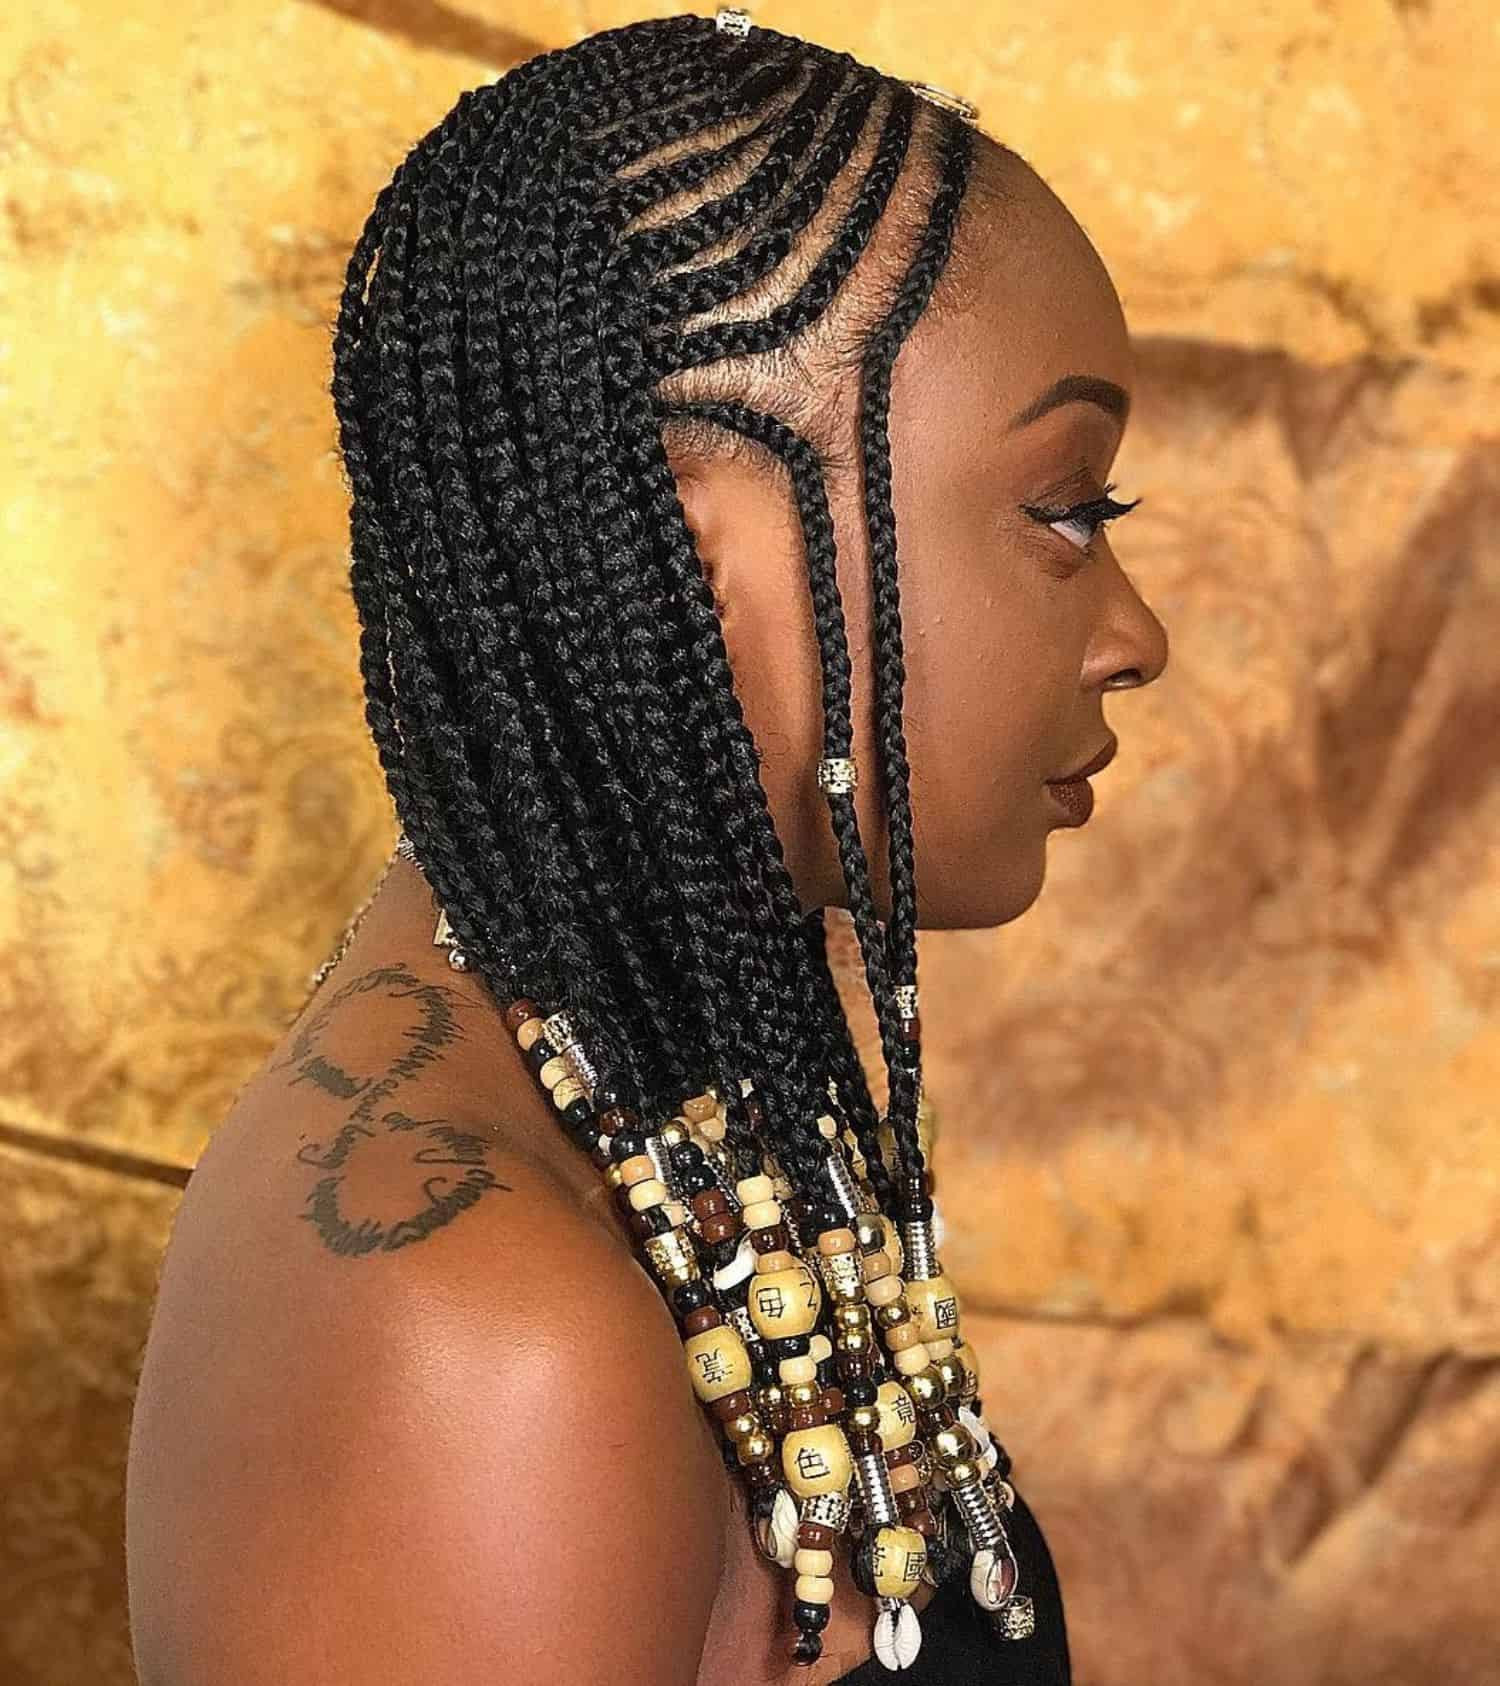 Braided Hairstyles For Black Hair
 30 Black Braided Hairstyles You Can Try For a Fancy